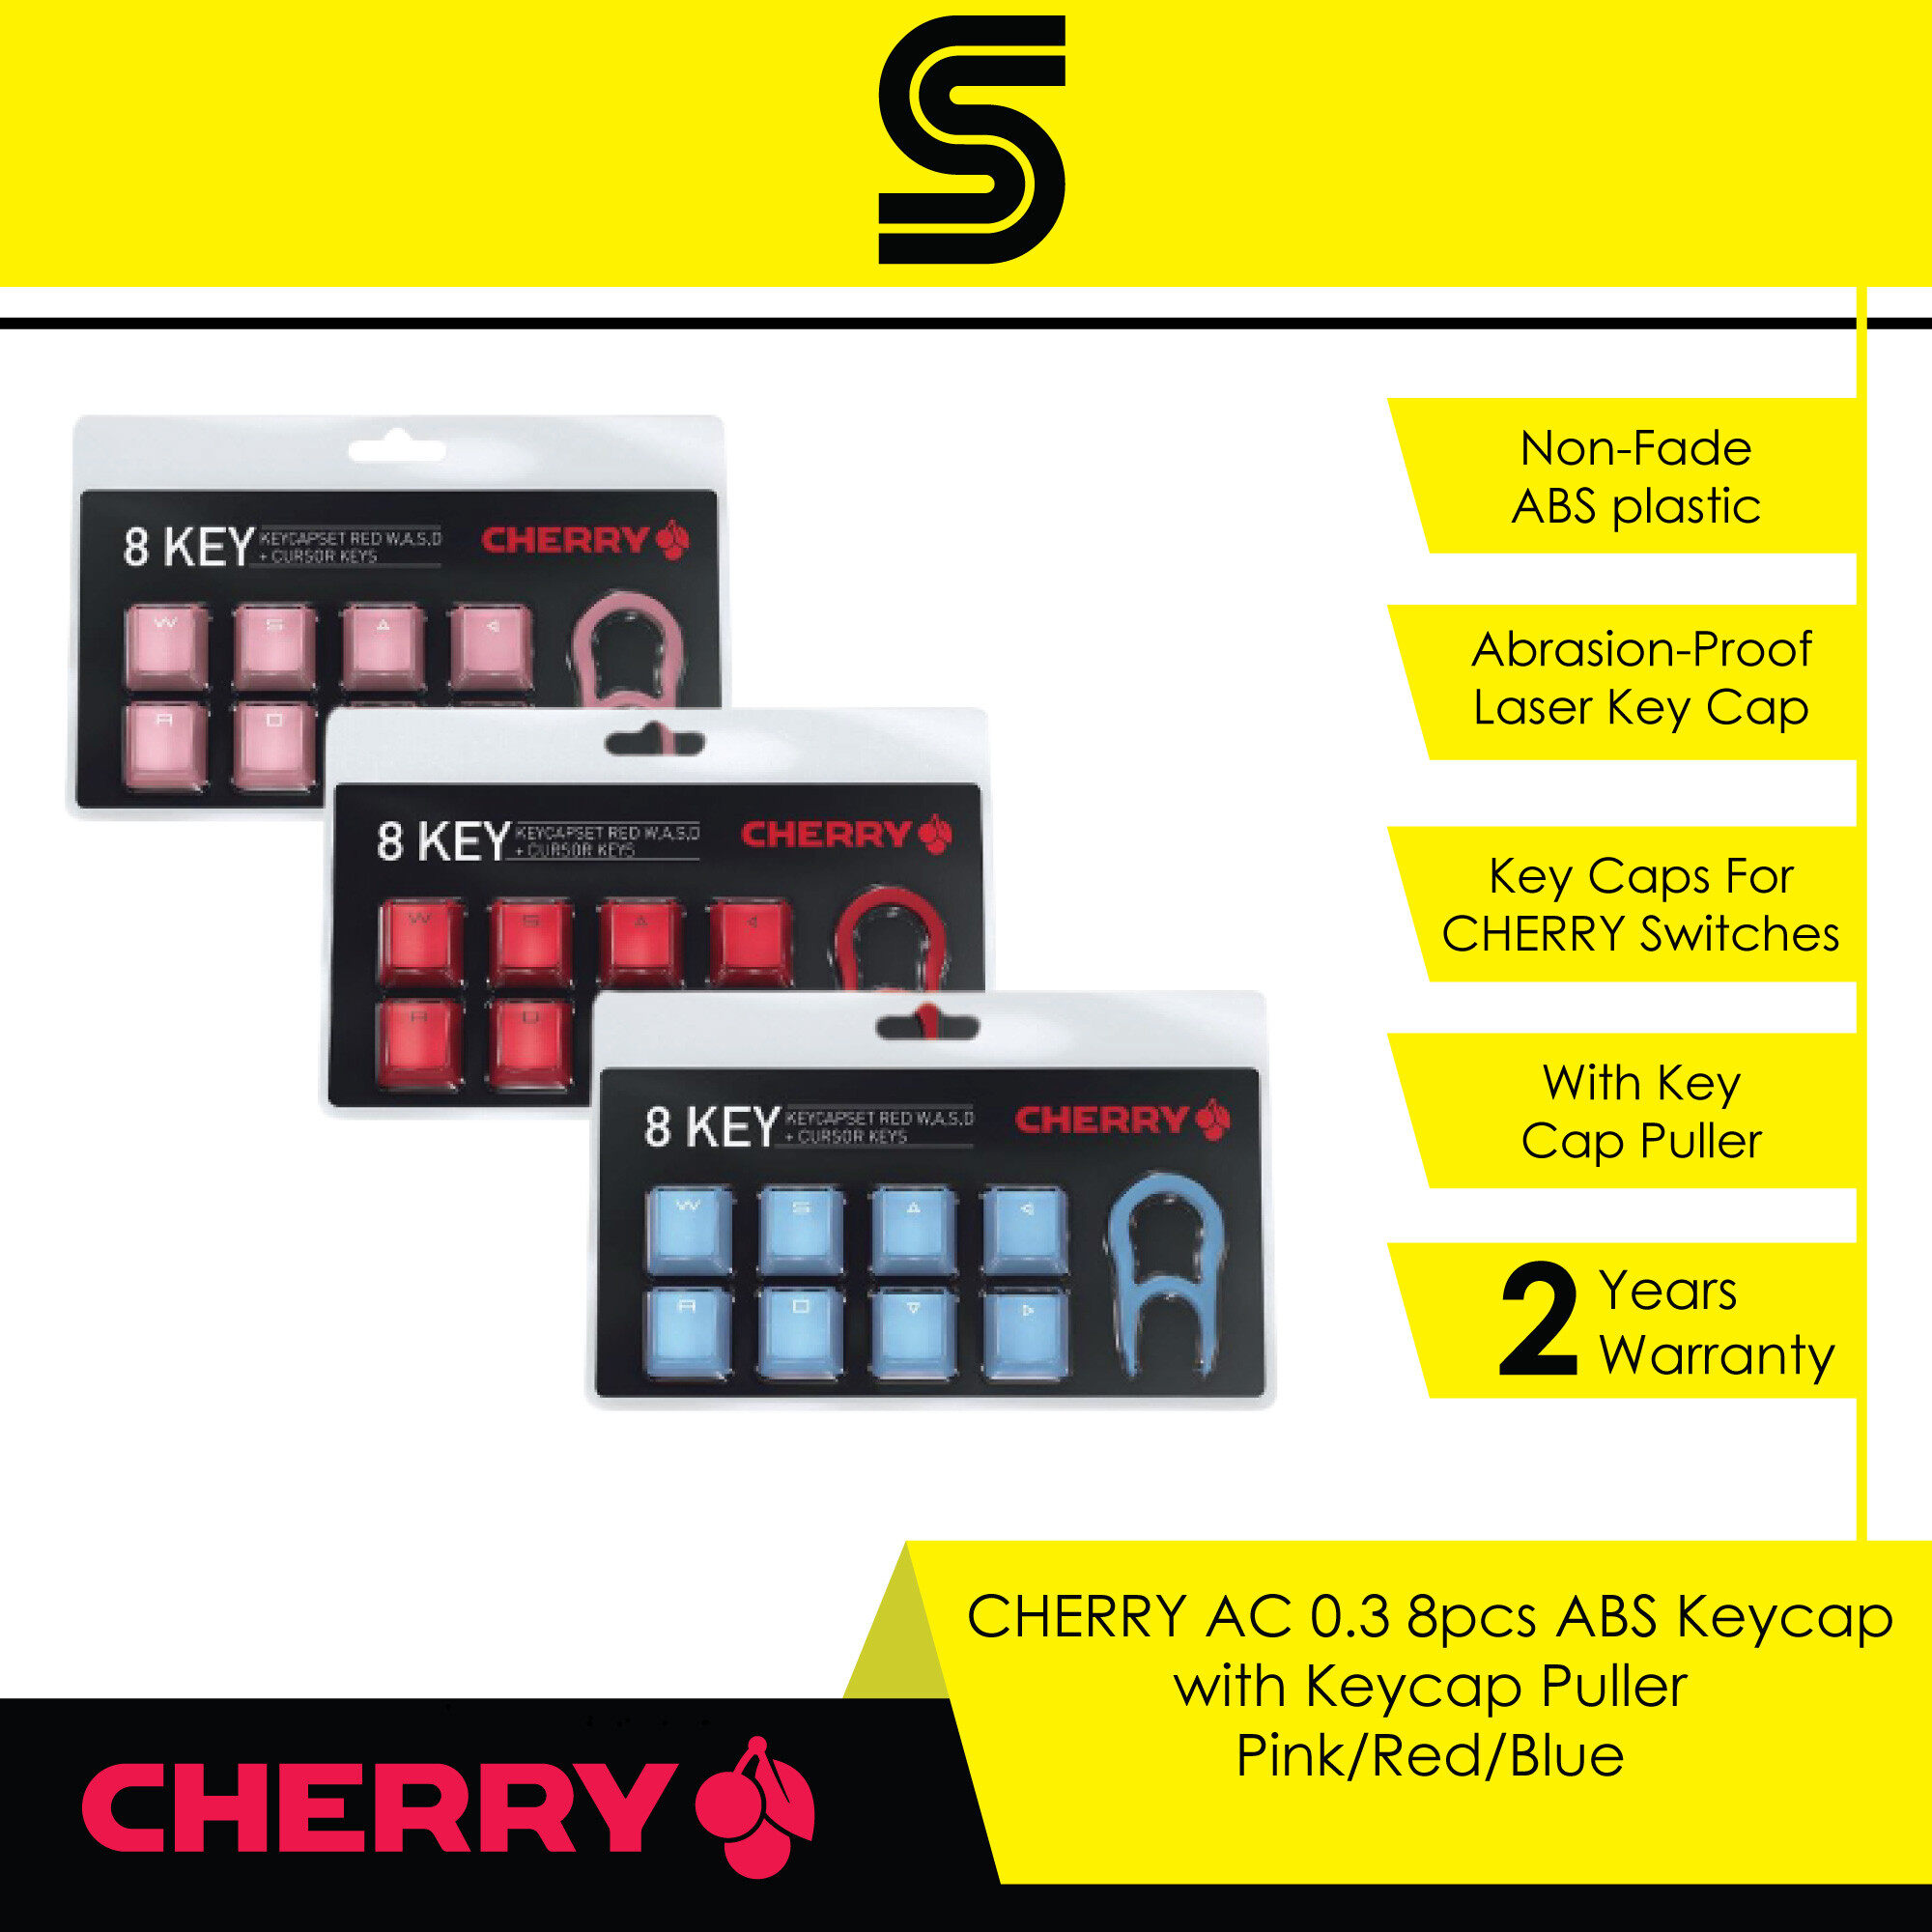 CHERRY AC 0.3 8pcs ABS Keycap with Keycap Puller -Pink/Blue/Red